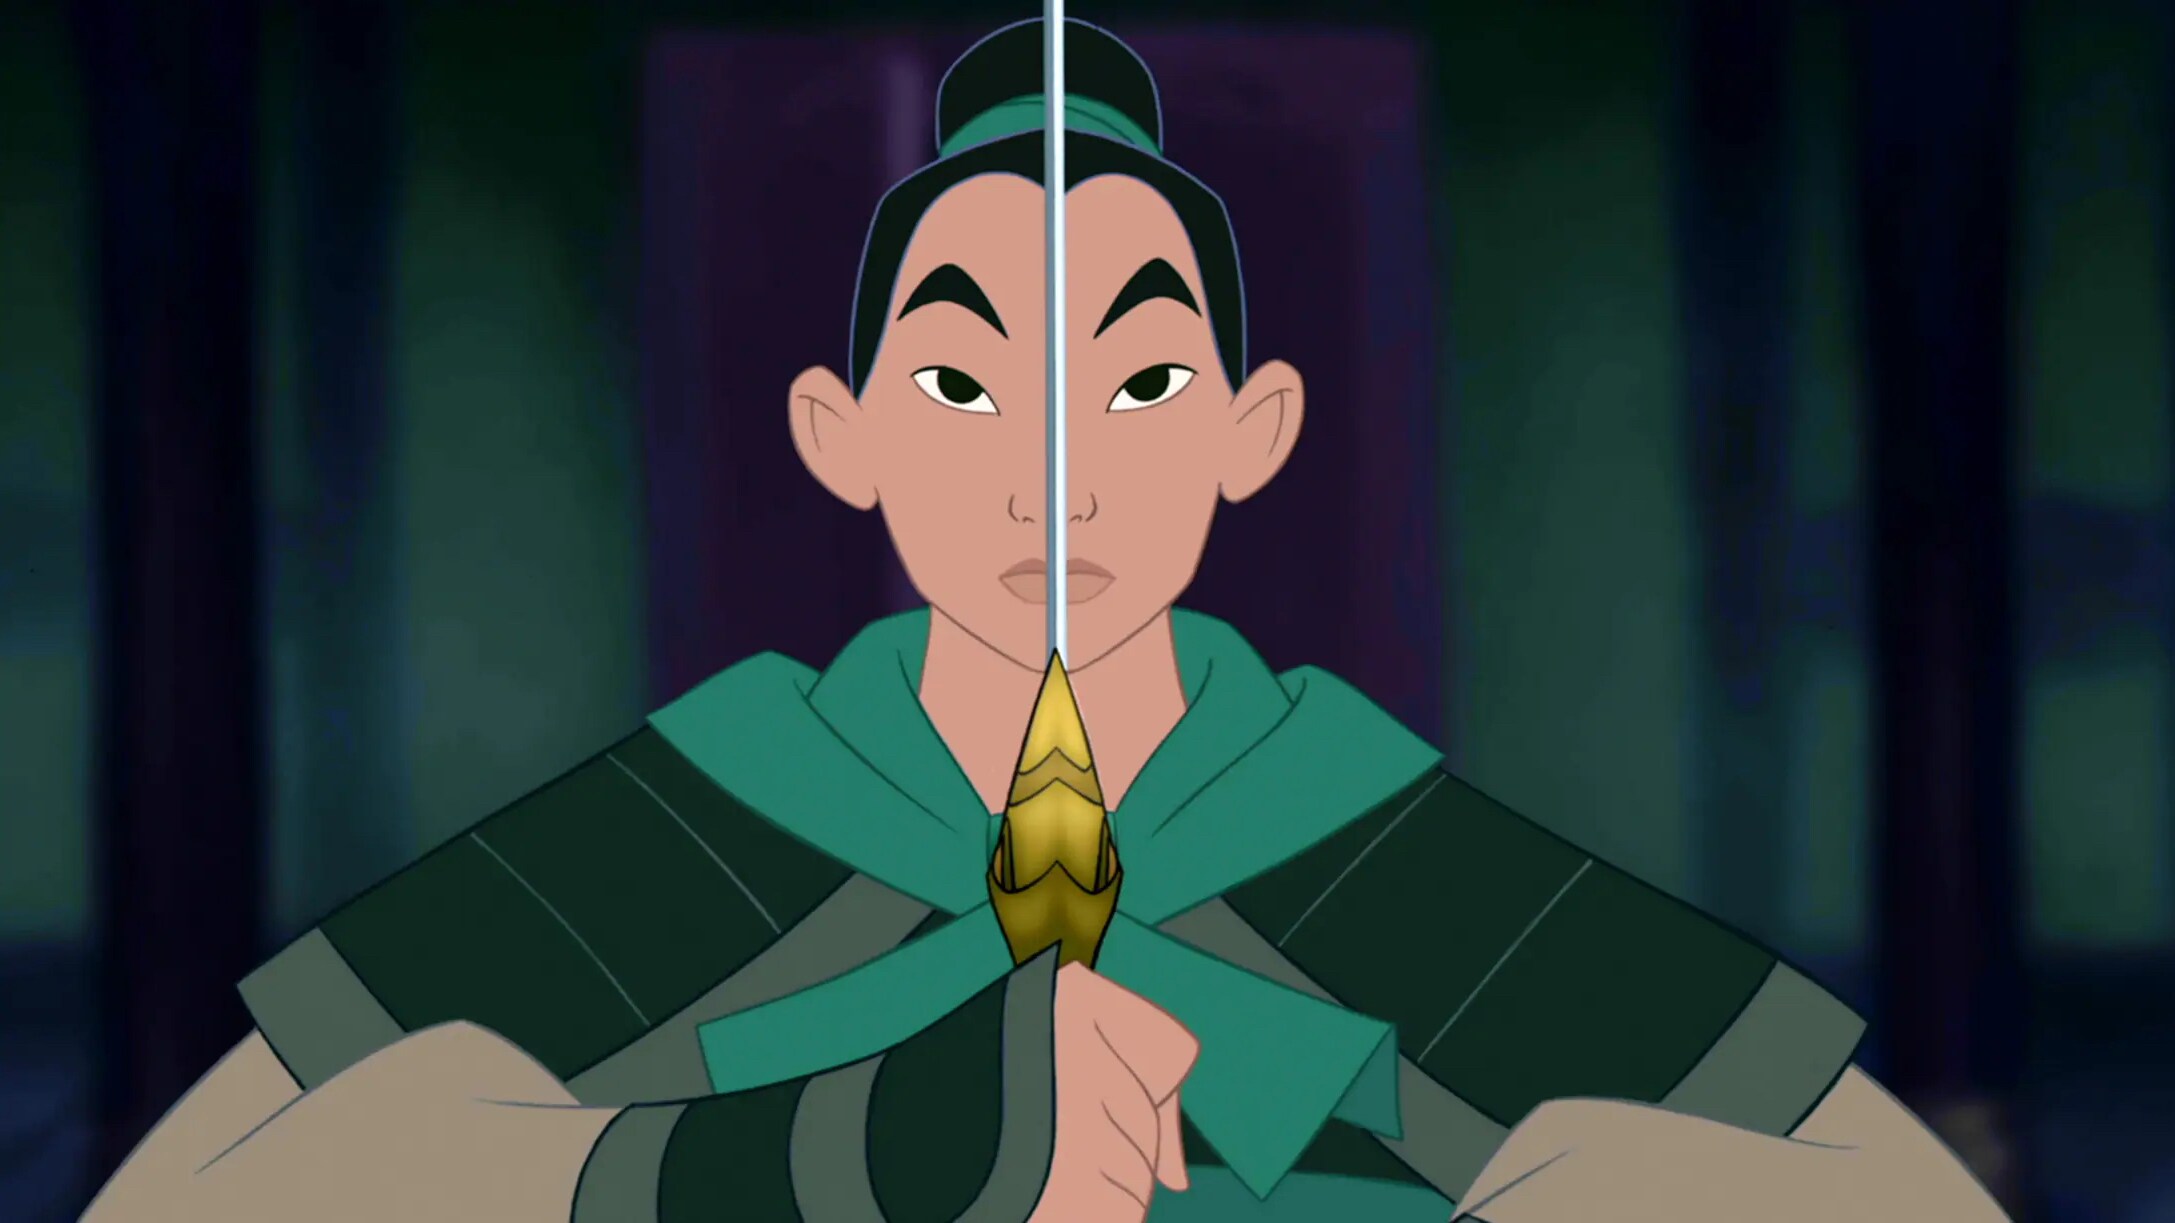 Mulan making the brave choice to take her father's place in the war.